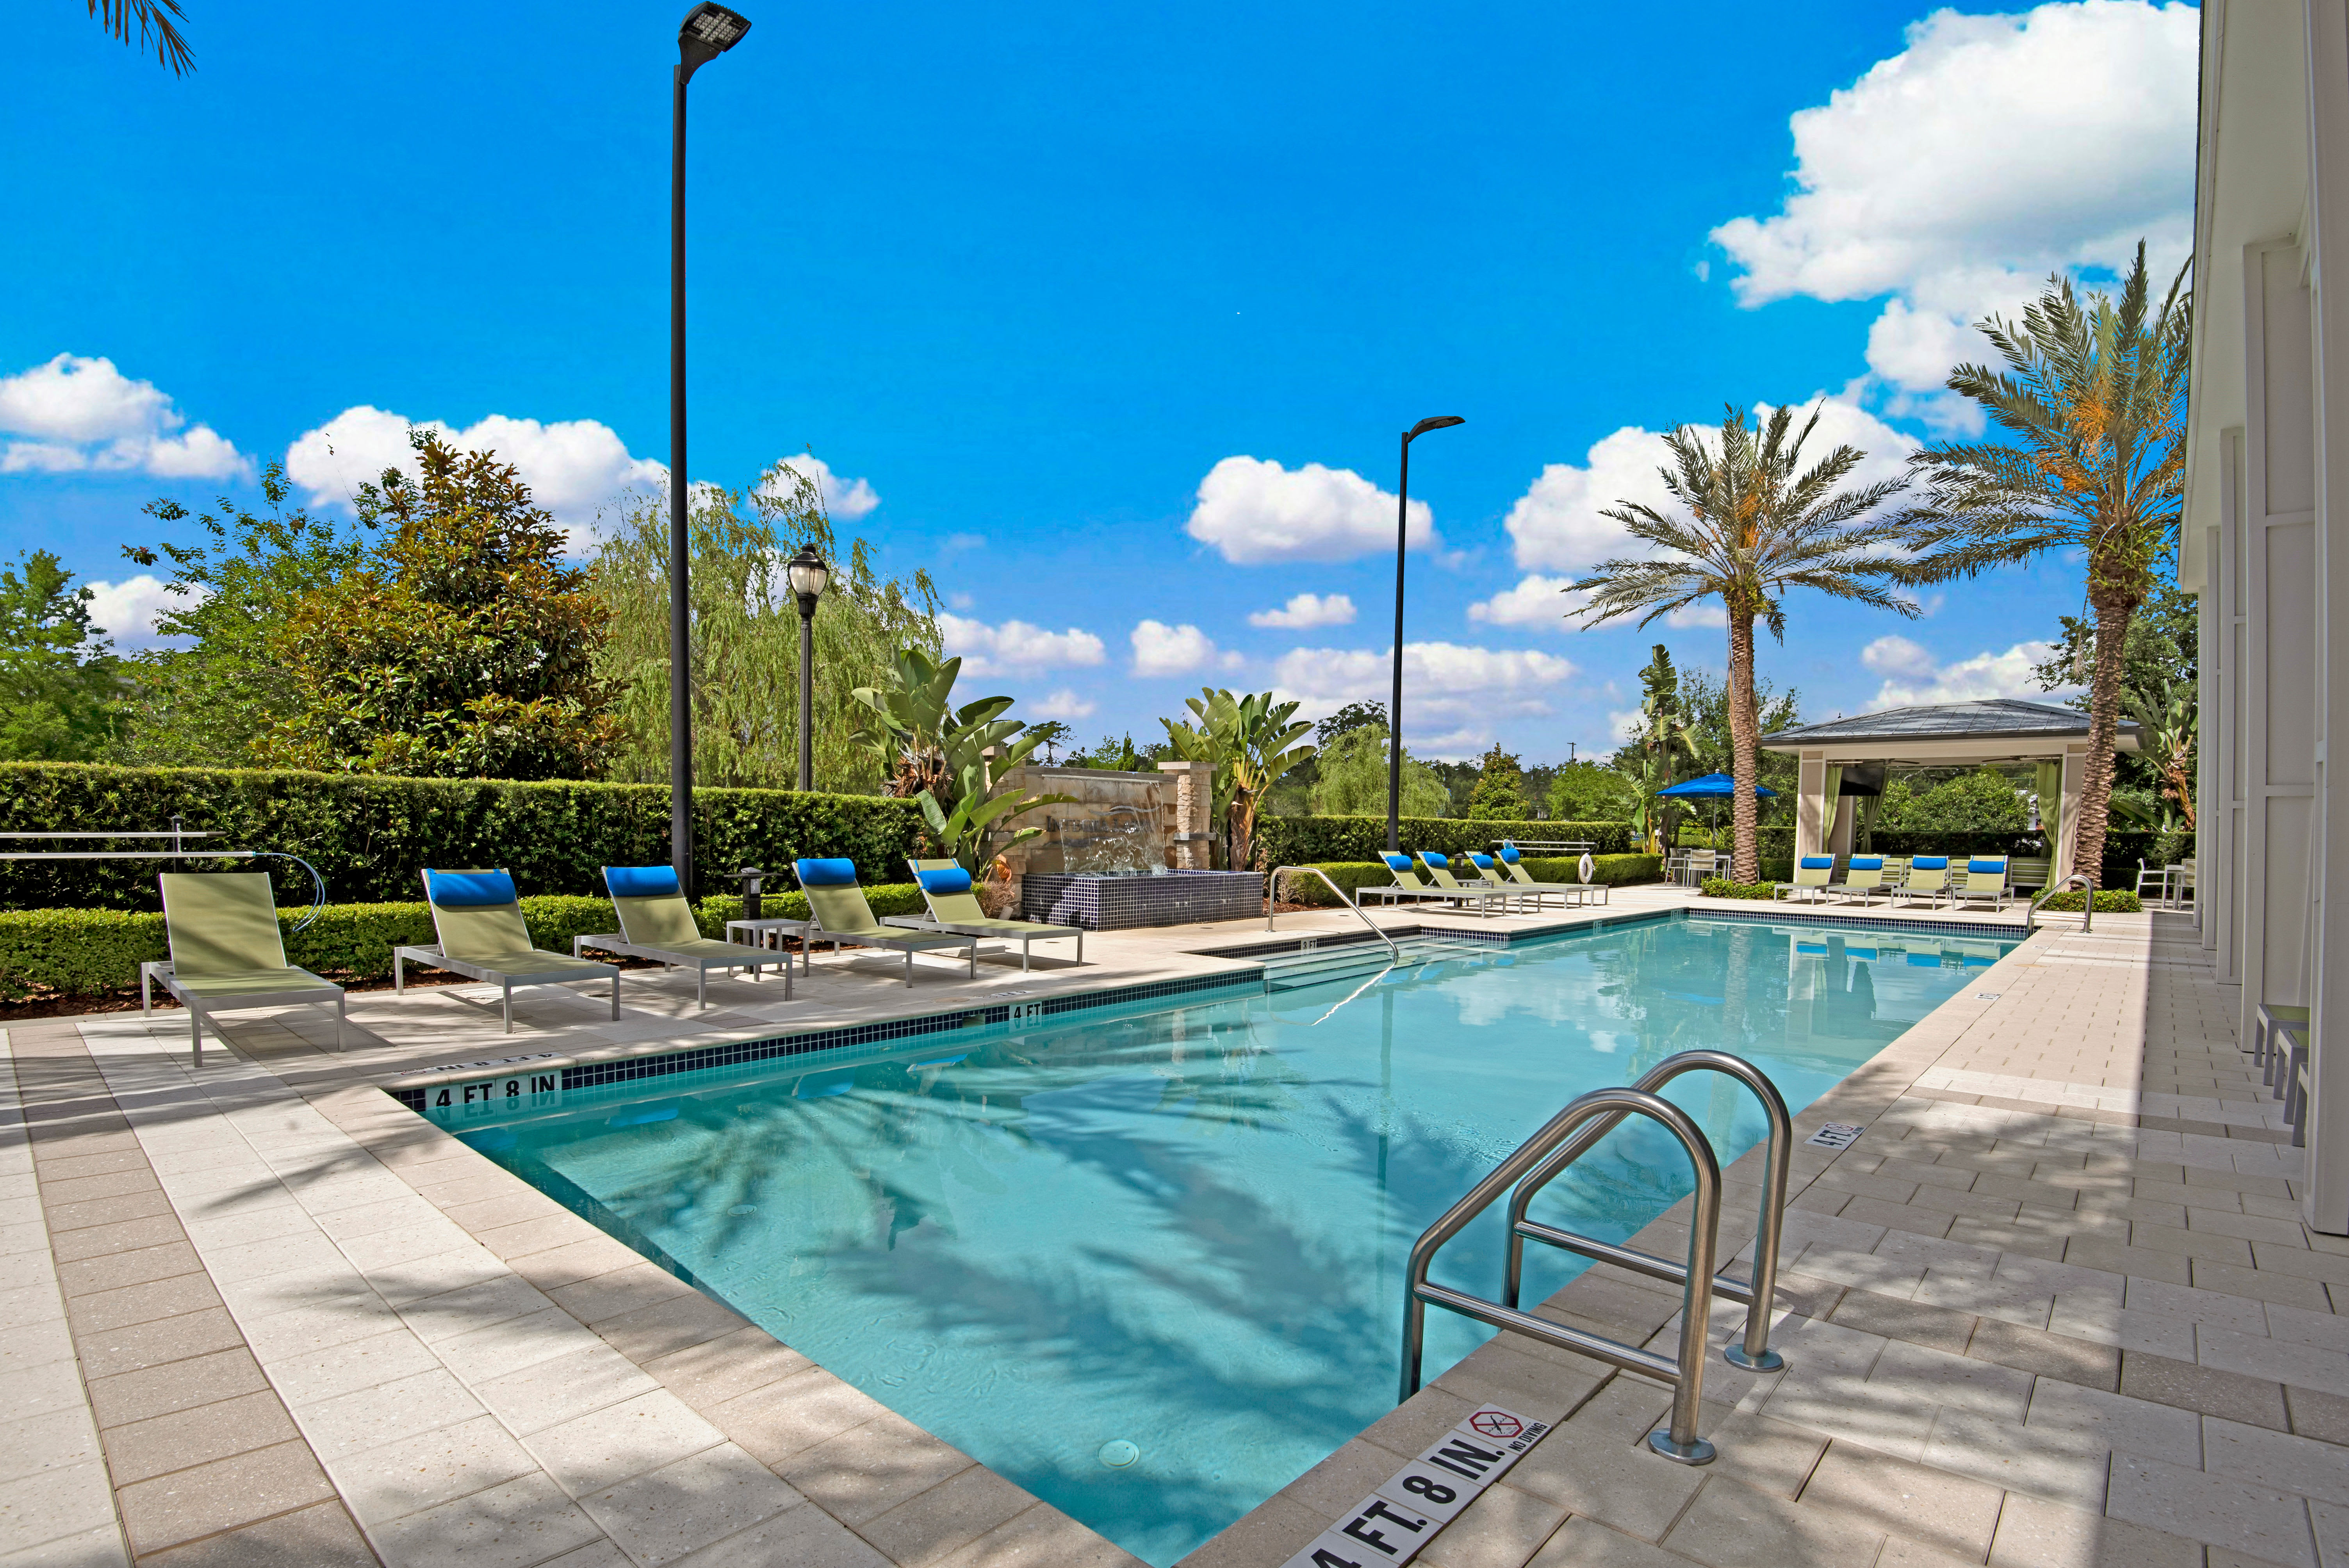 Outdoor pool lounging area at Integra Lakes in Casselberry, Florida